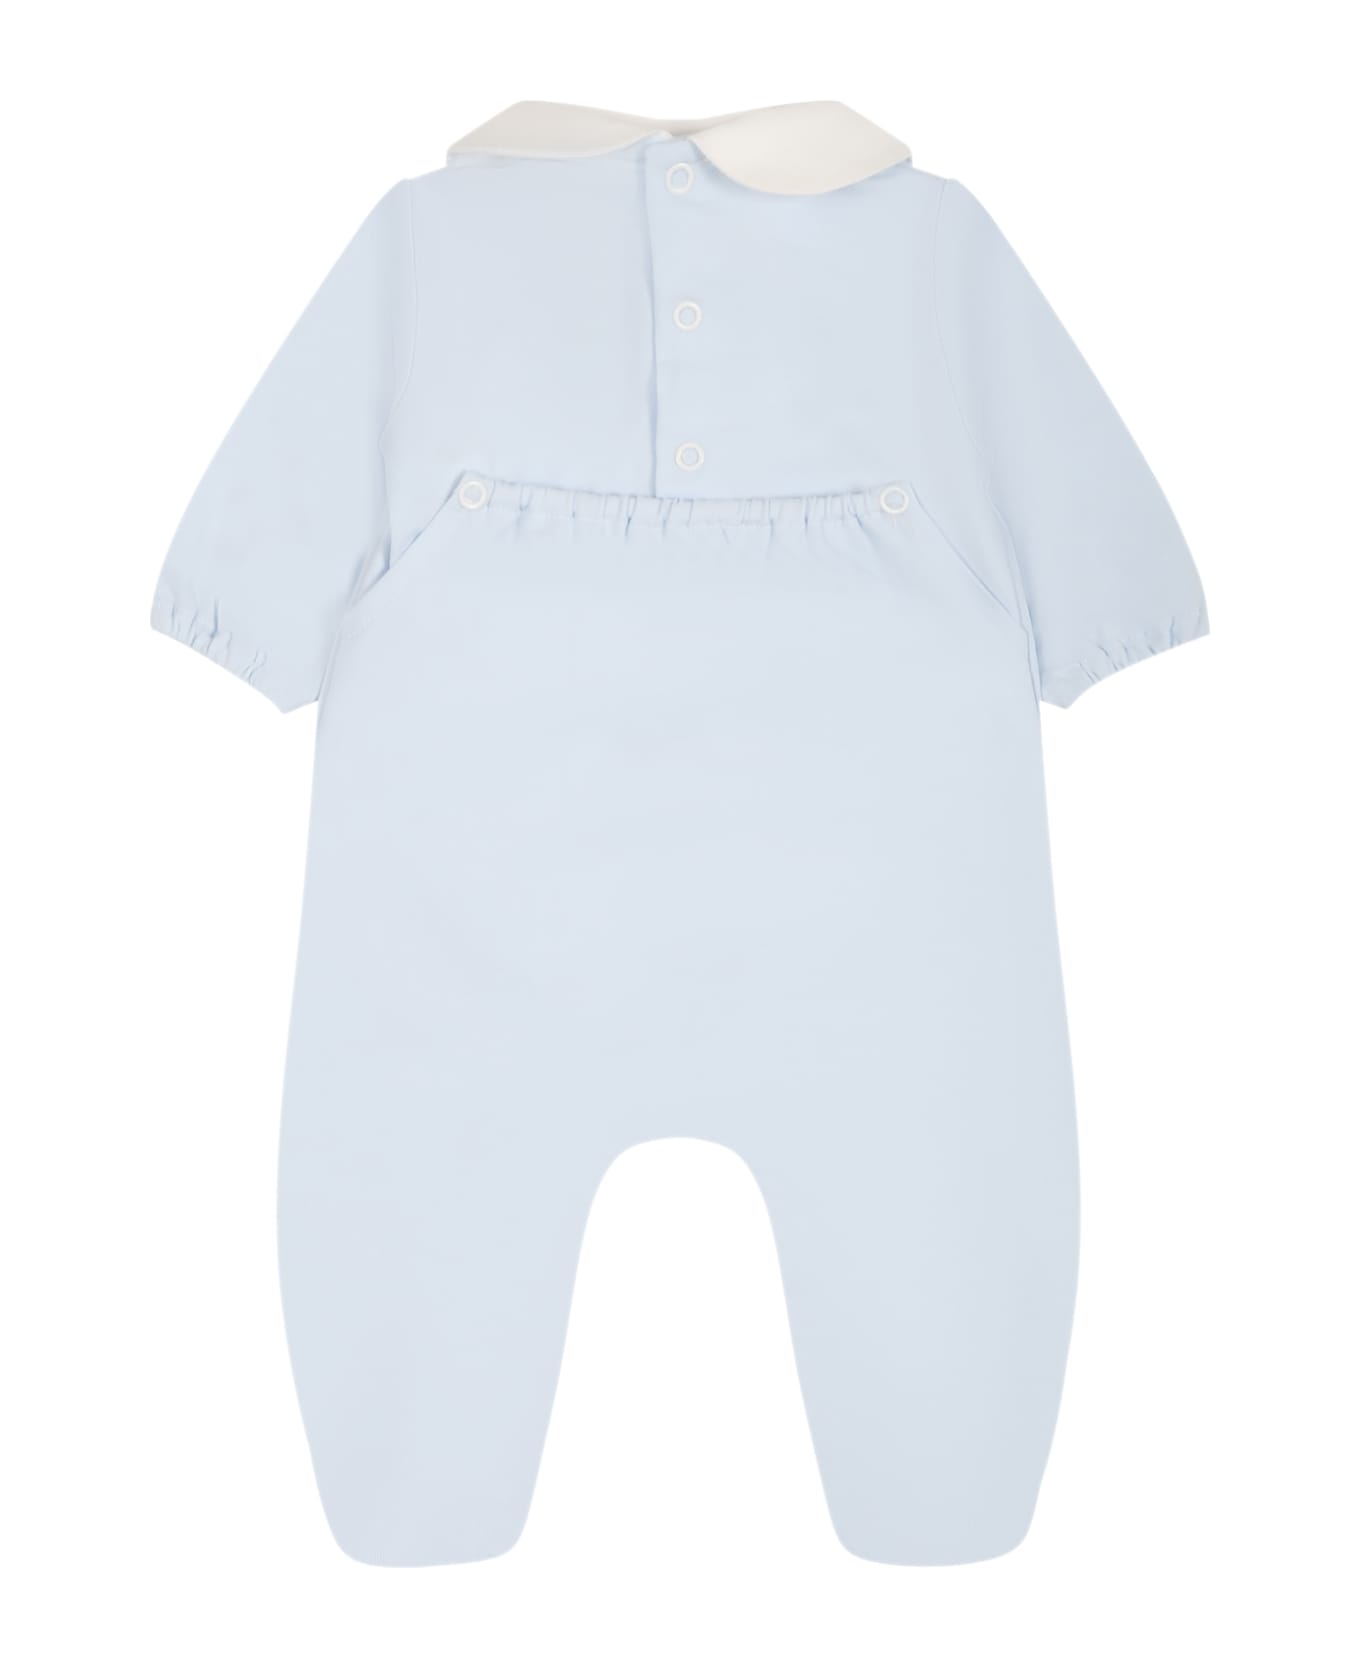 Little Bear Light Blue Onesie For Baby Boy With Writing And Heart - Cielo ボディスーツ＆セットアップ